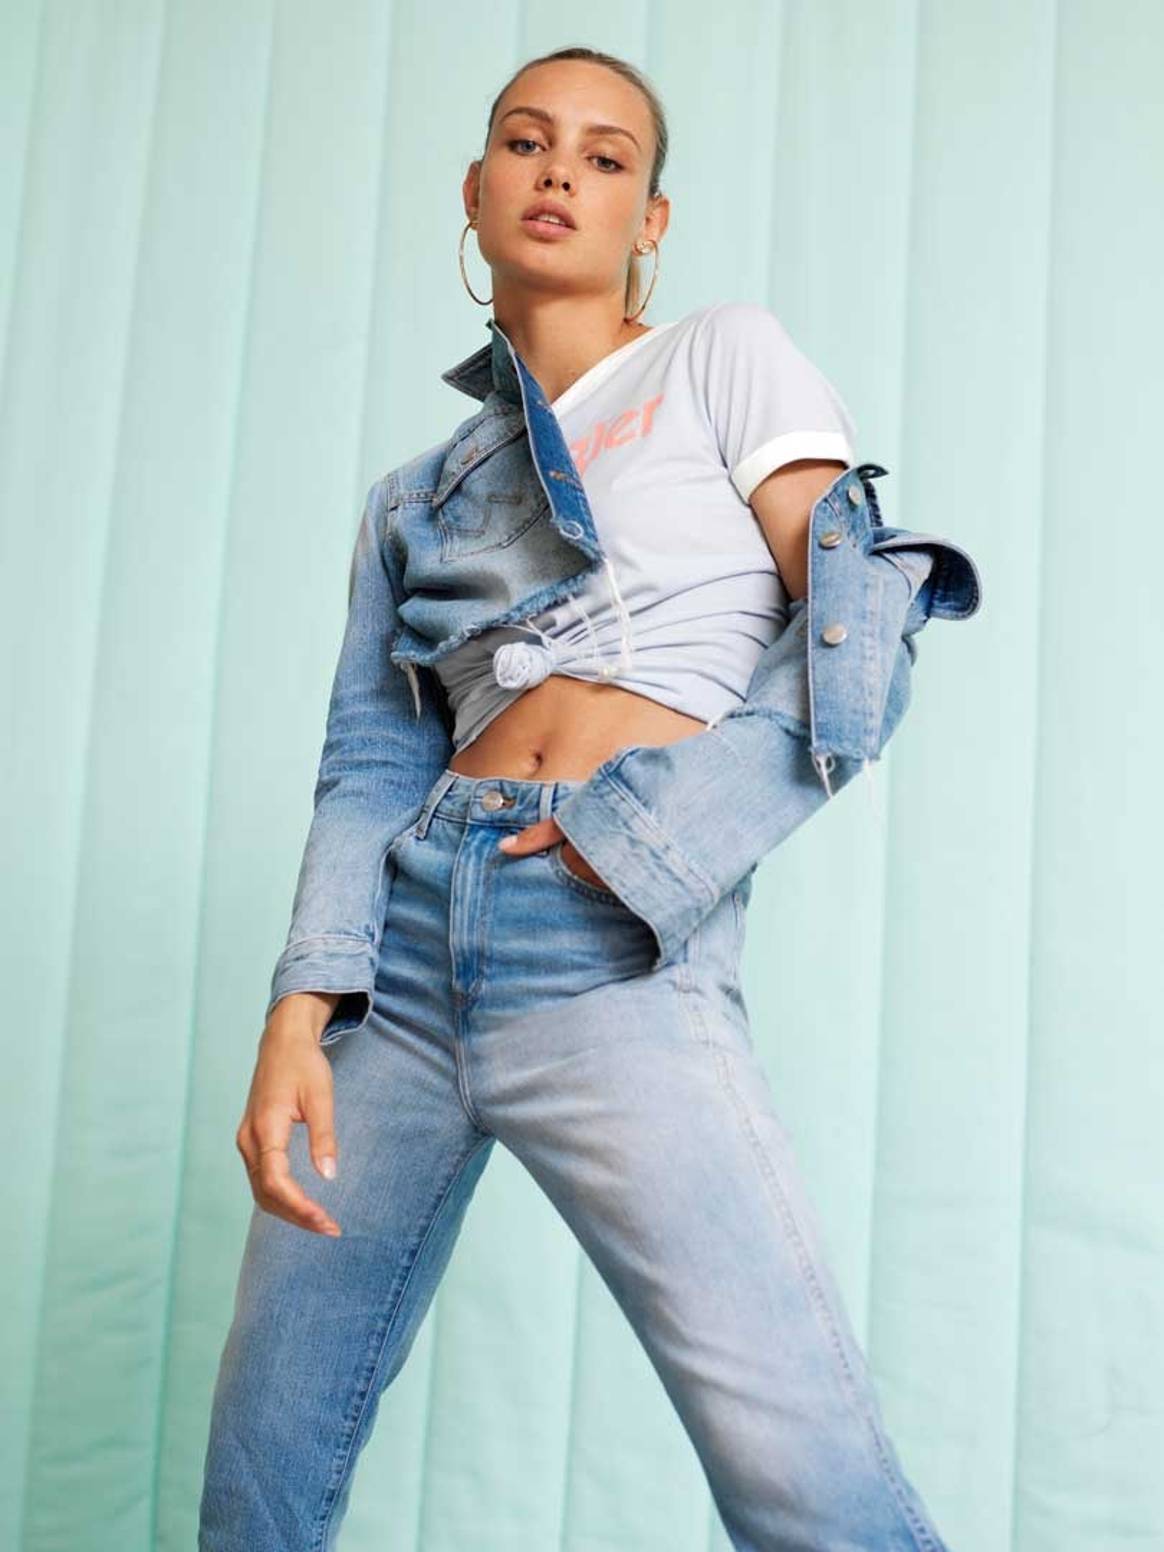 In Pictures: Wrangler debuts energetic, bold SS18 collections